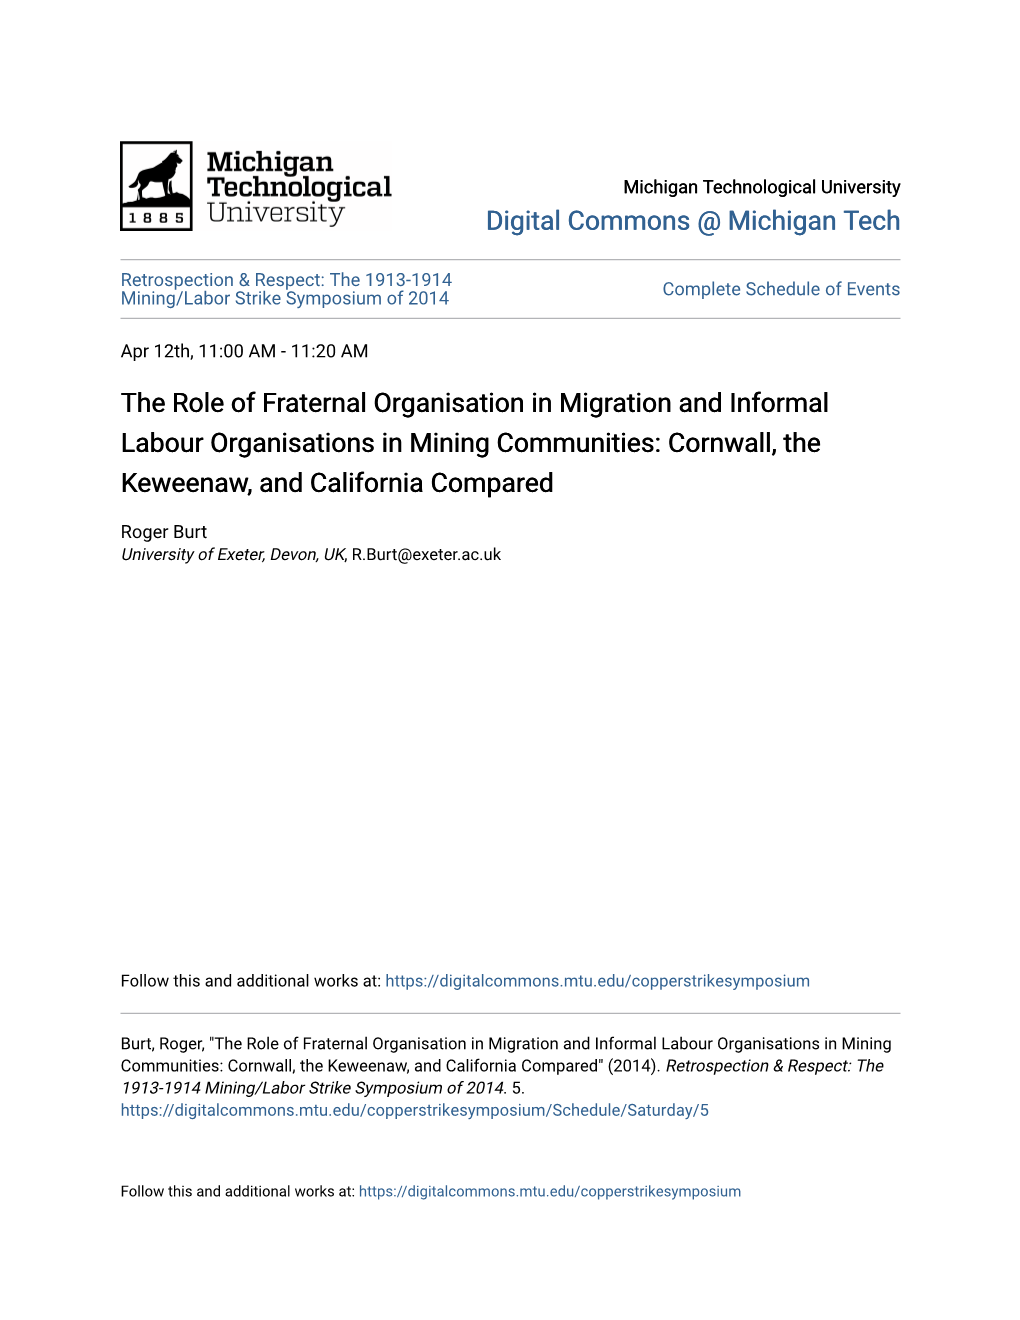 The Role of Fraternal Organisation in Migration and Informal Labour Organisations in Mining Communities: Cornwall, the Keweenaw, and California Compared